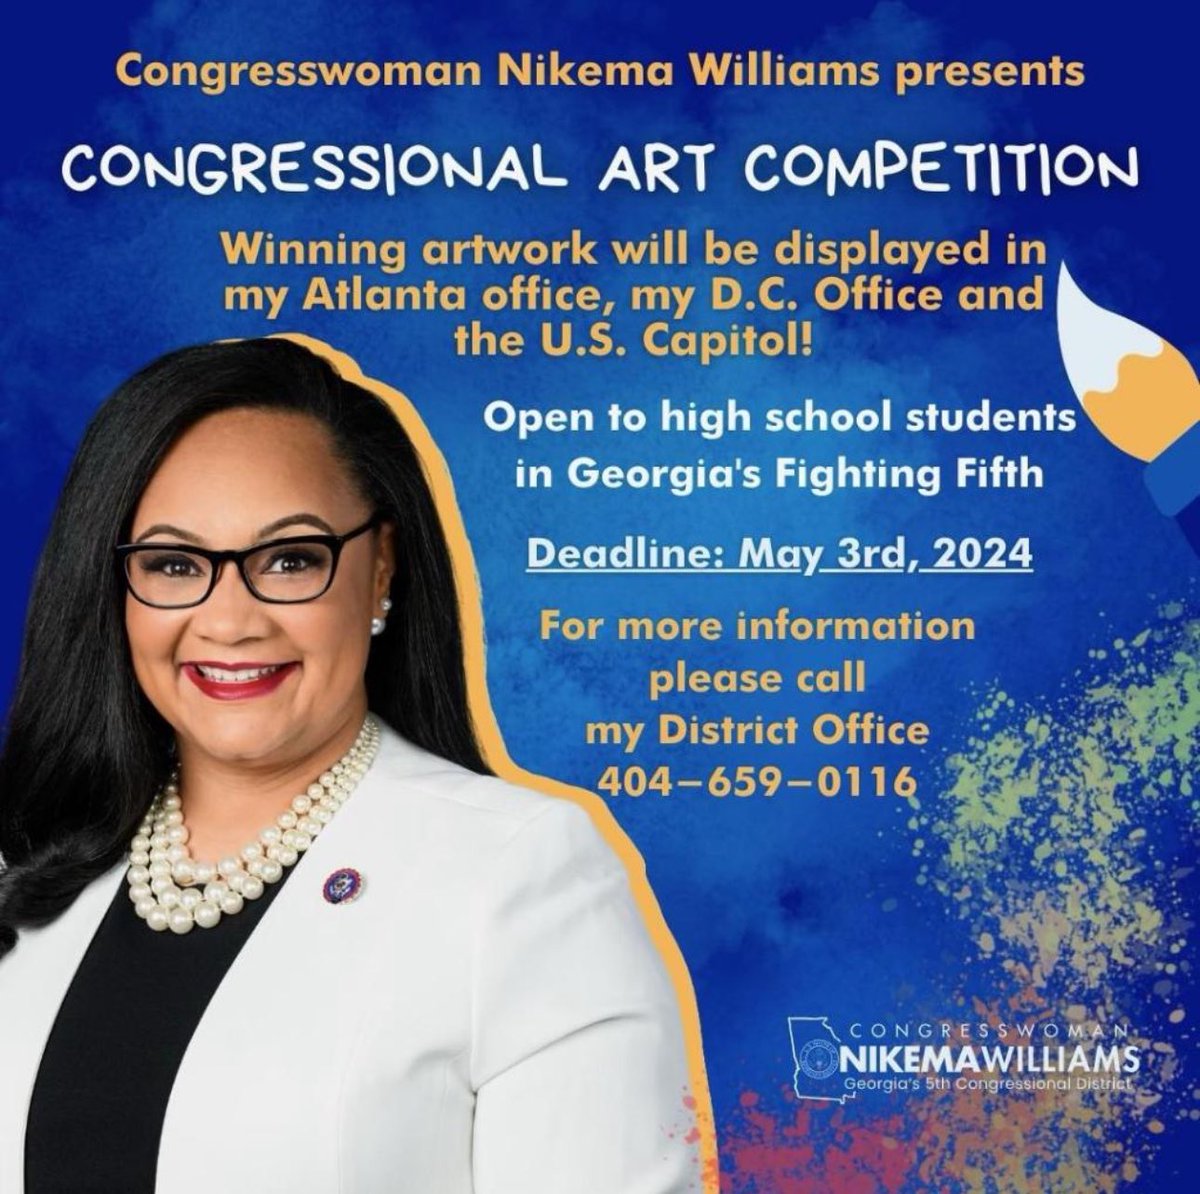 Congressional Art Competition | Deadline: May 3, 2024 | The winning art work will be displayed in her Atlanta Office, her D.C. Office, and the U.S. Capitol!